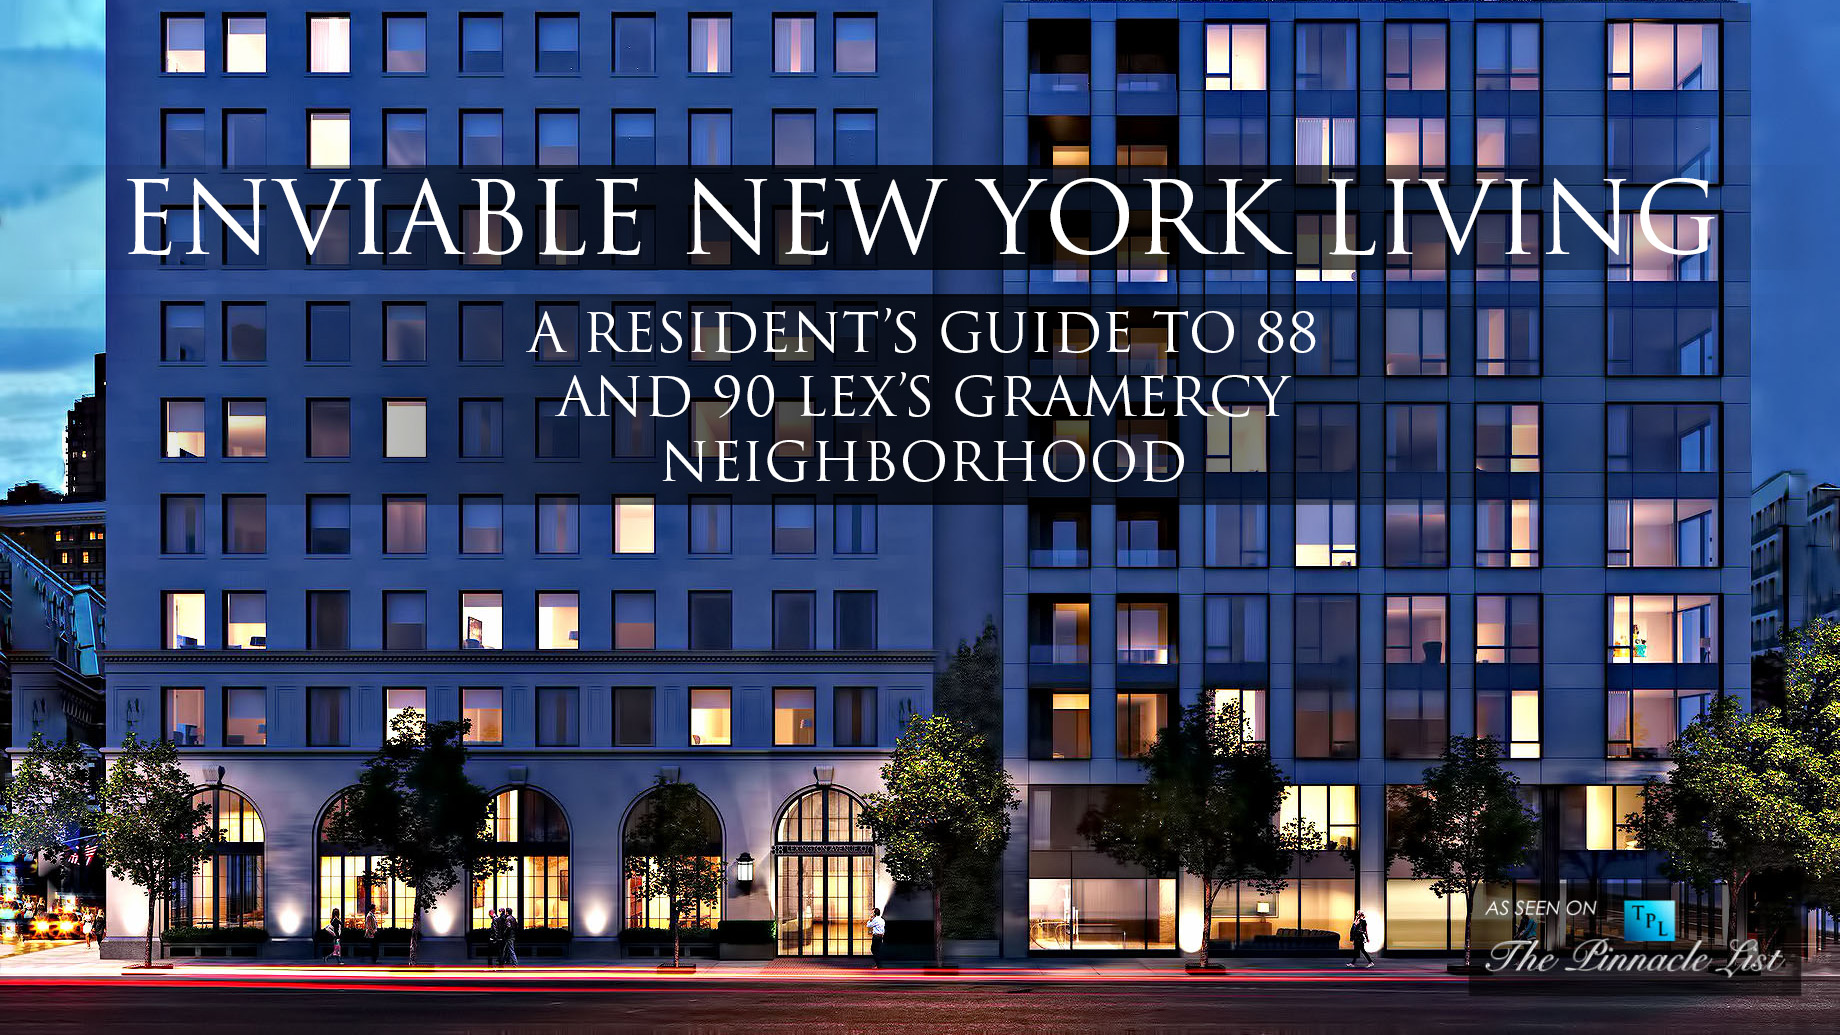 Enviable New York Living – A Resident’s Guide to 88 and 90 Lex’s Gramercy Neighborhood